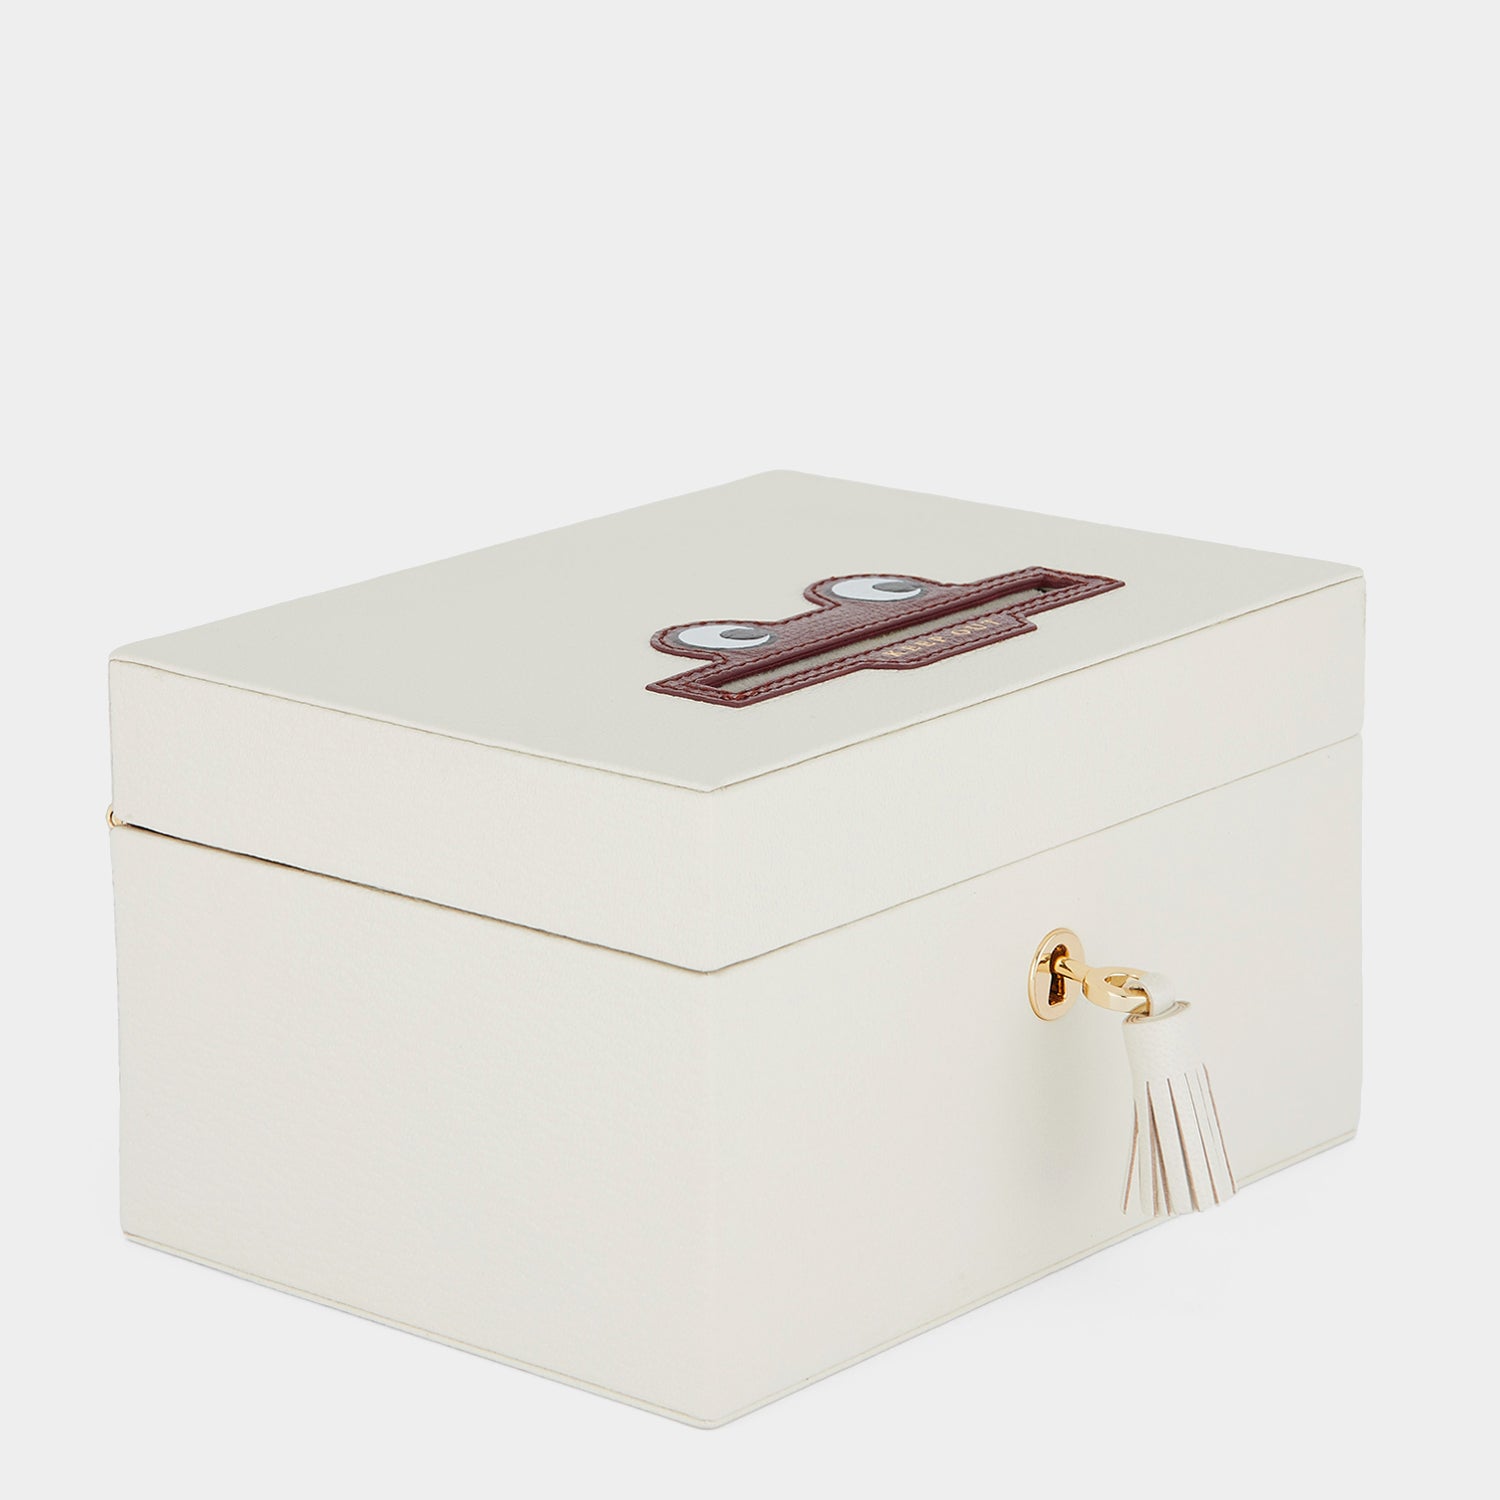 Keep Out Small Box -

                  
                    Capra Leather in Chalk -
                  

                  Anya Hindmarch US
